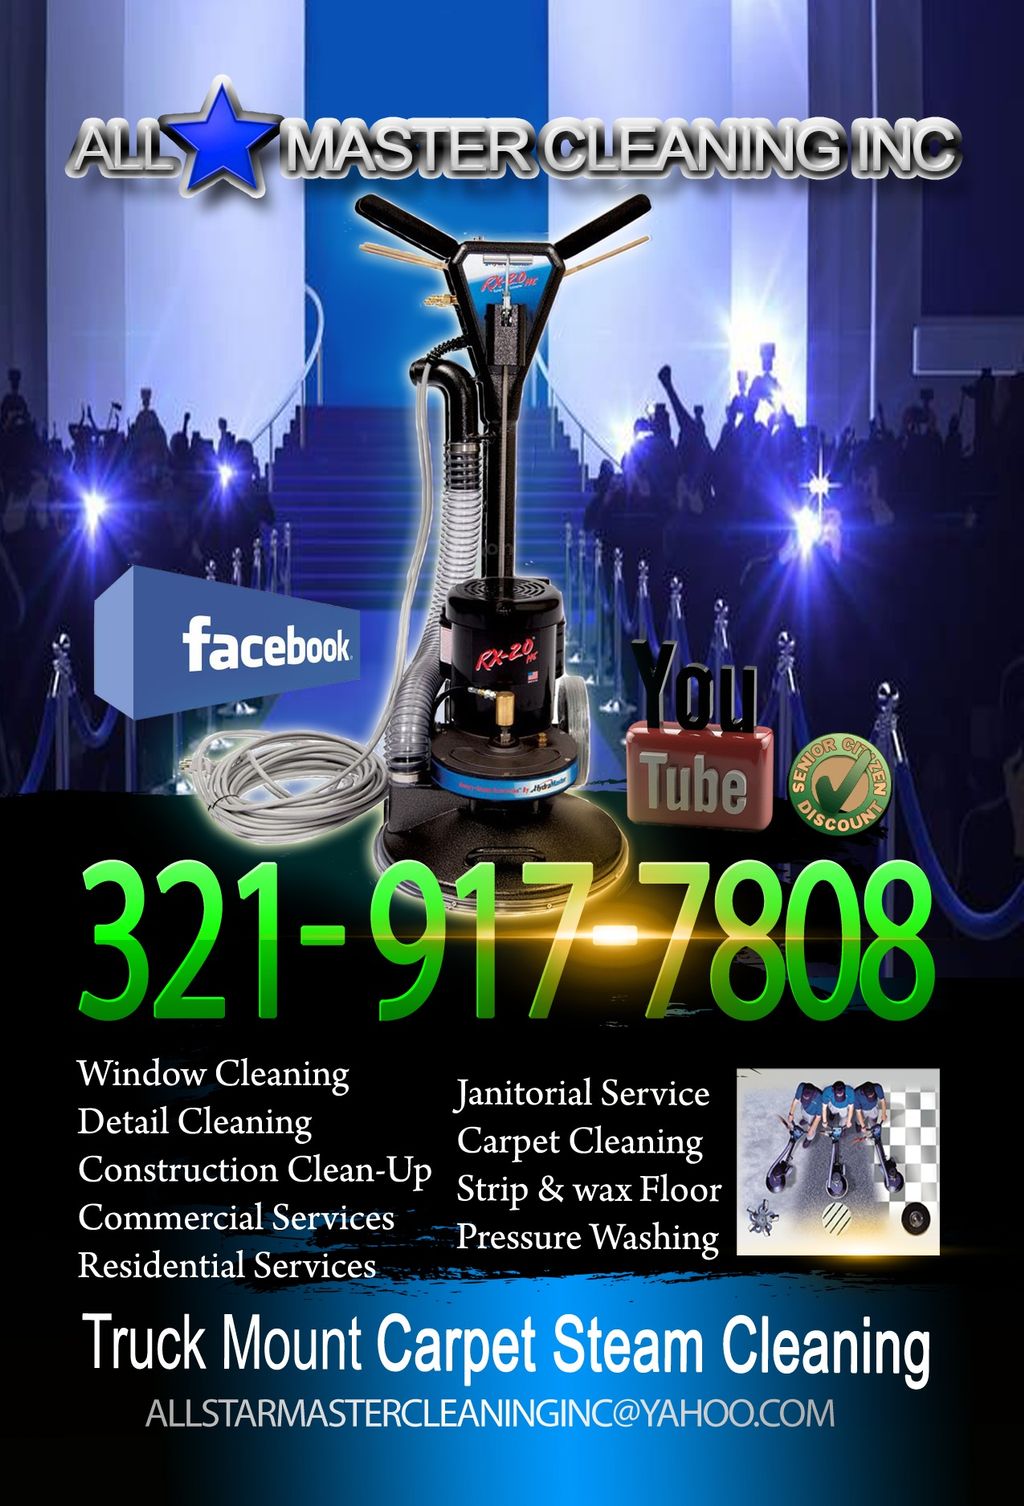 All Star Master Cleaning Inc.